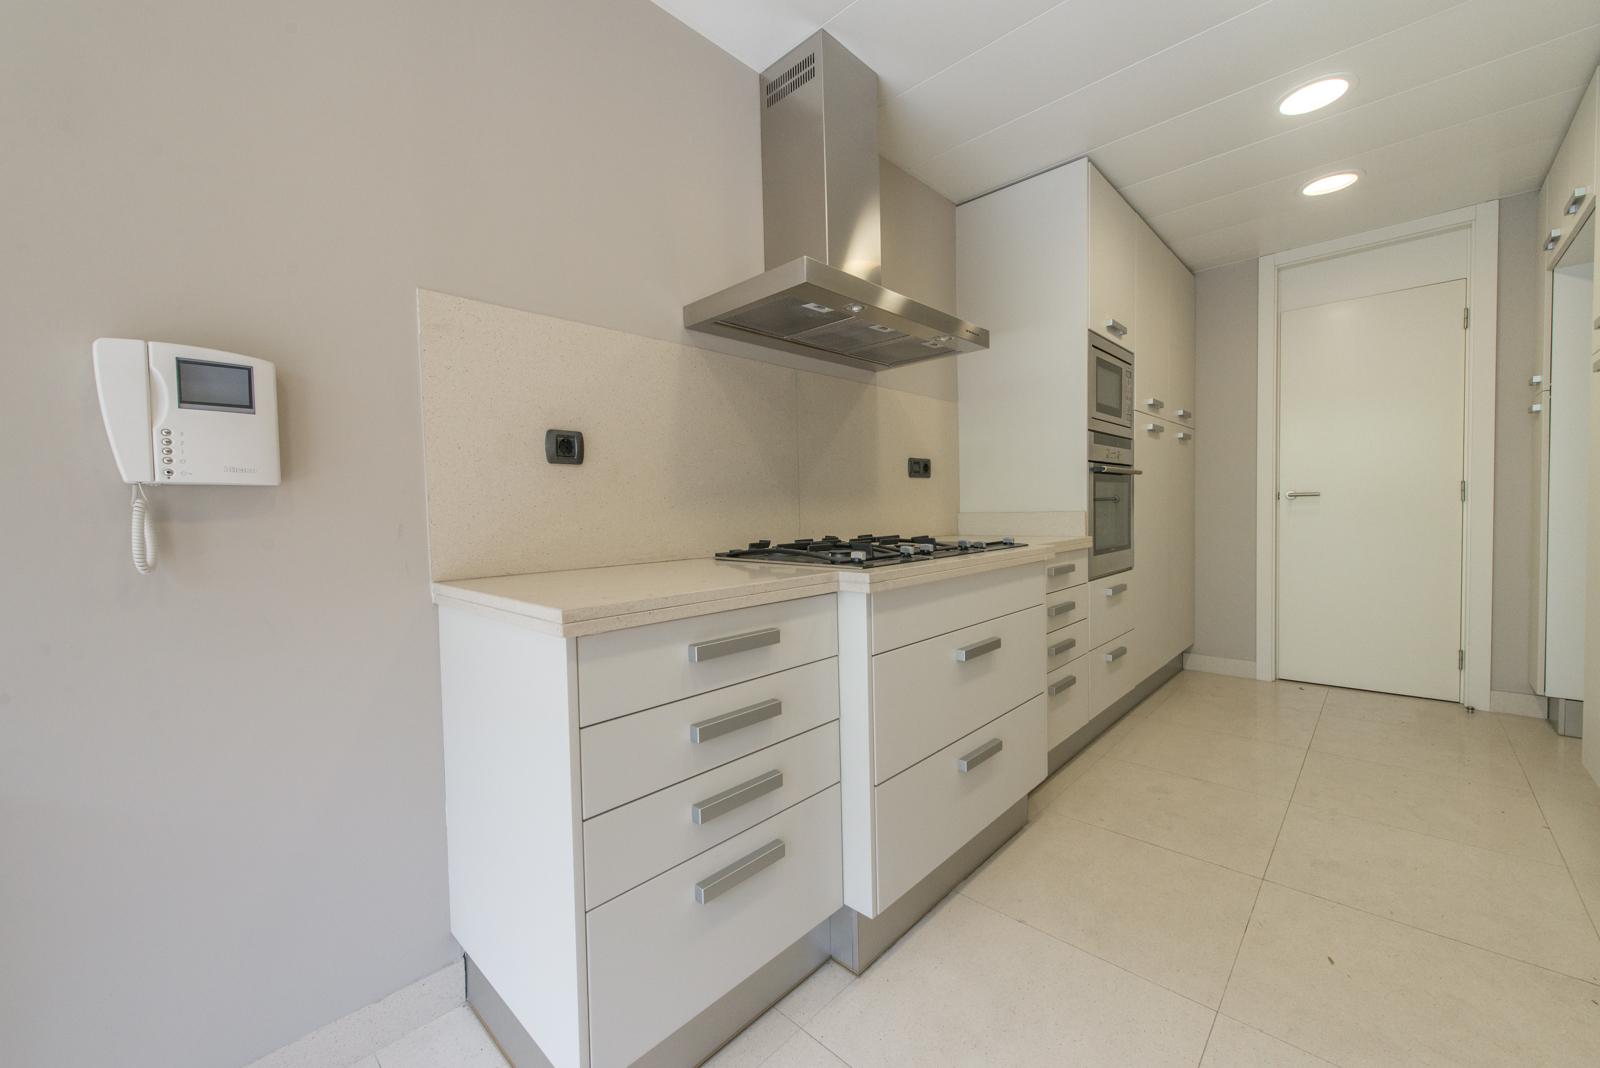 151215 Flat for sale in Gràcia, Vallcarca and les Penitents 5